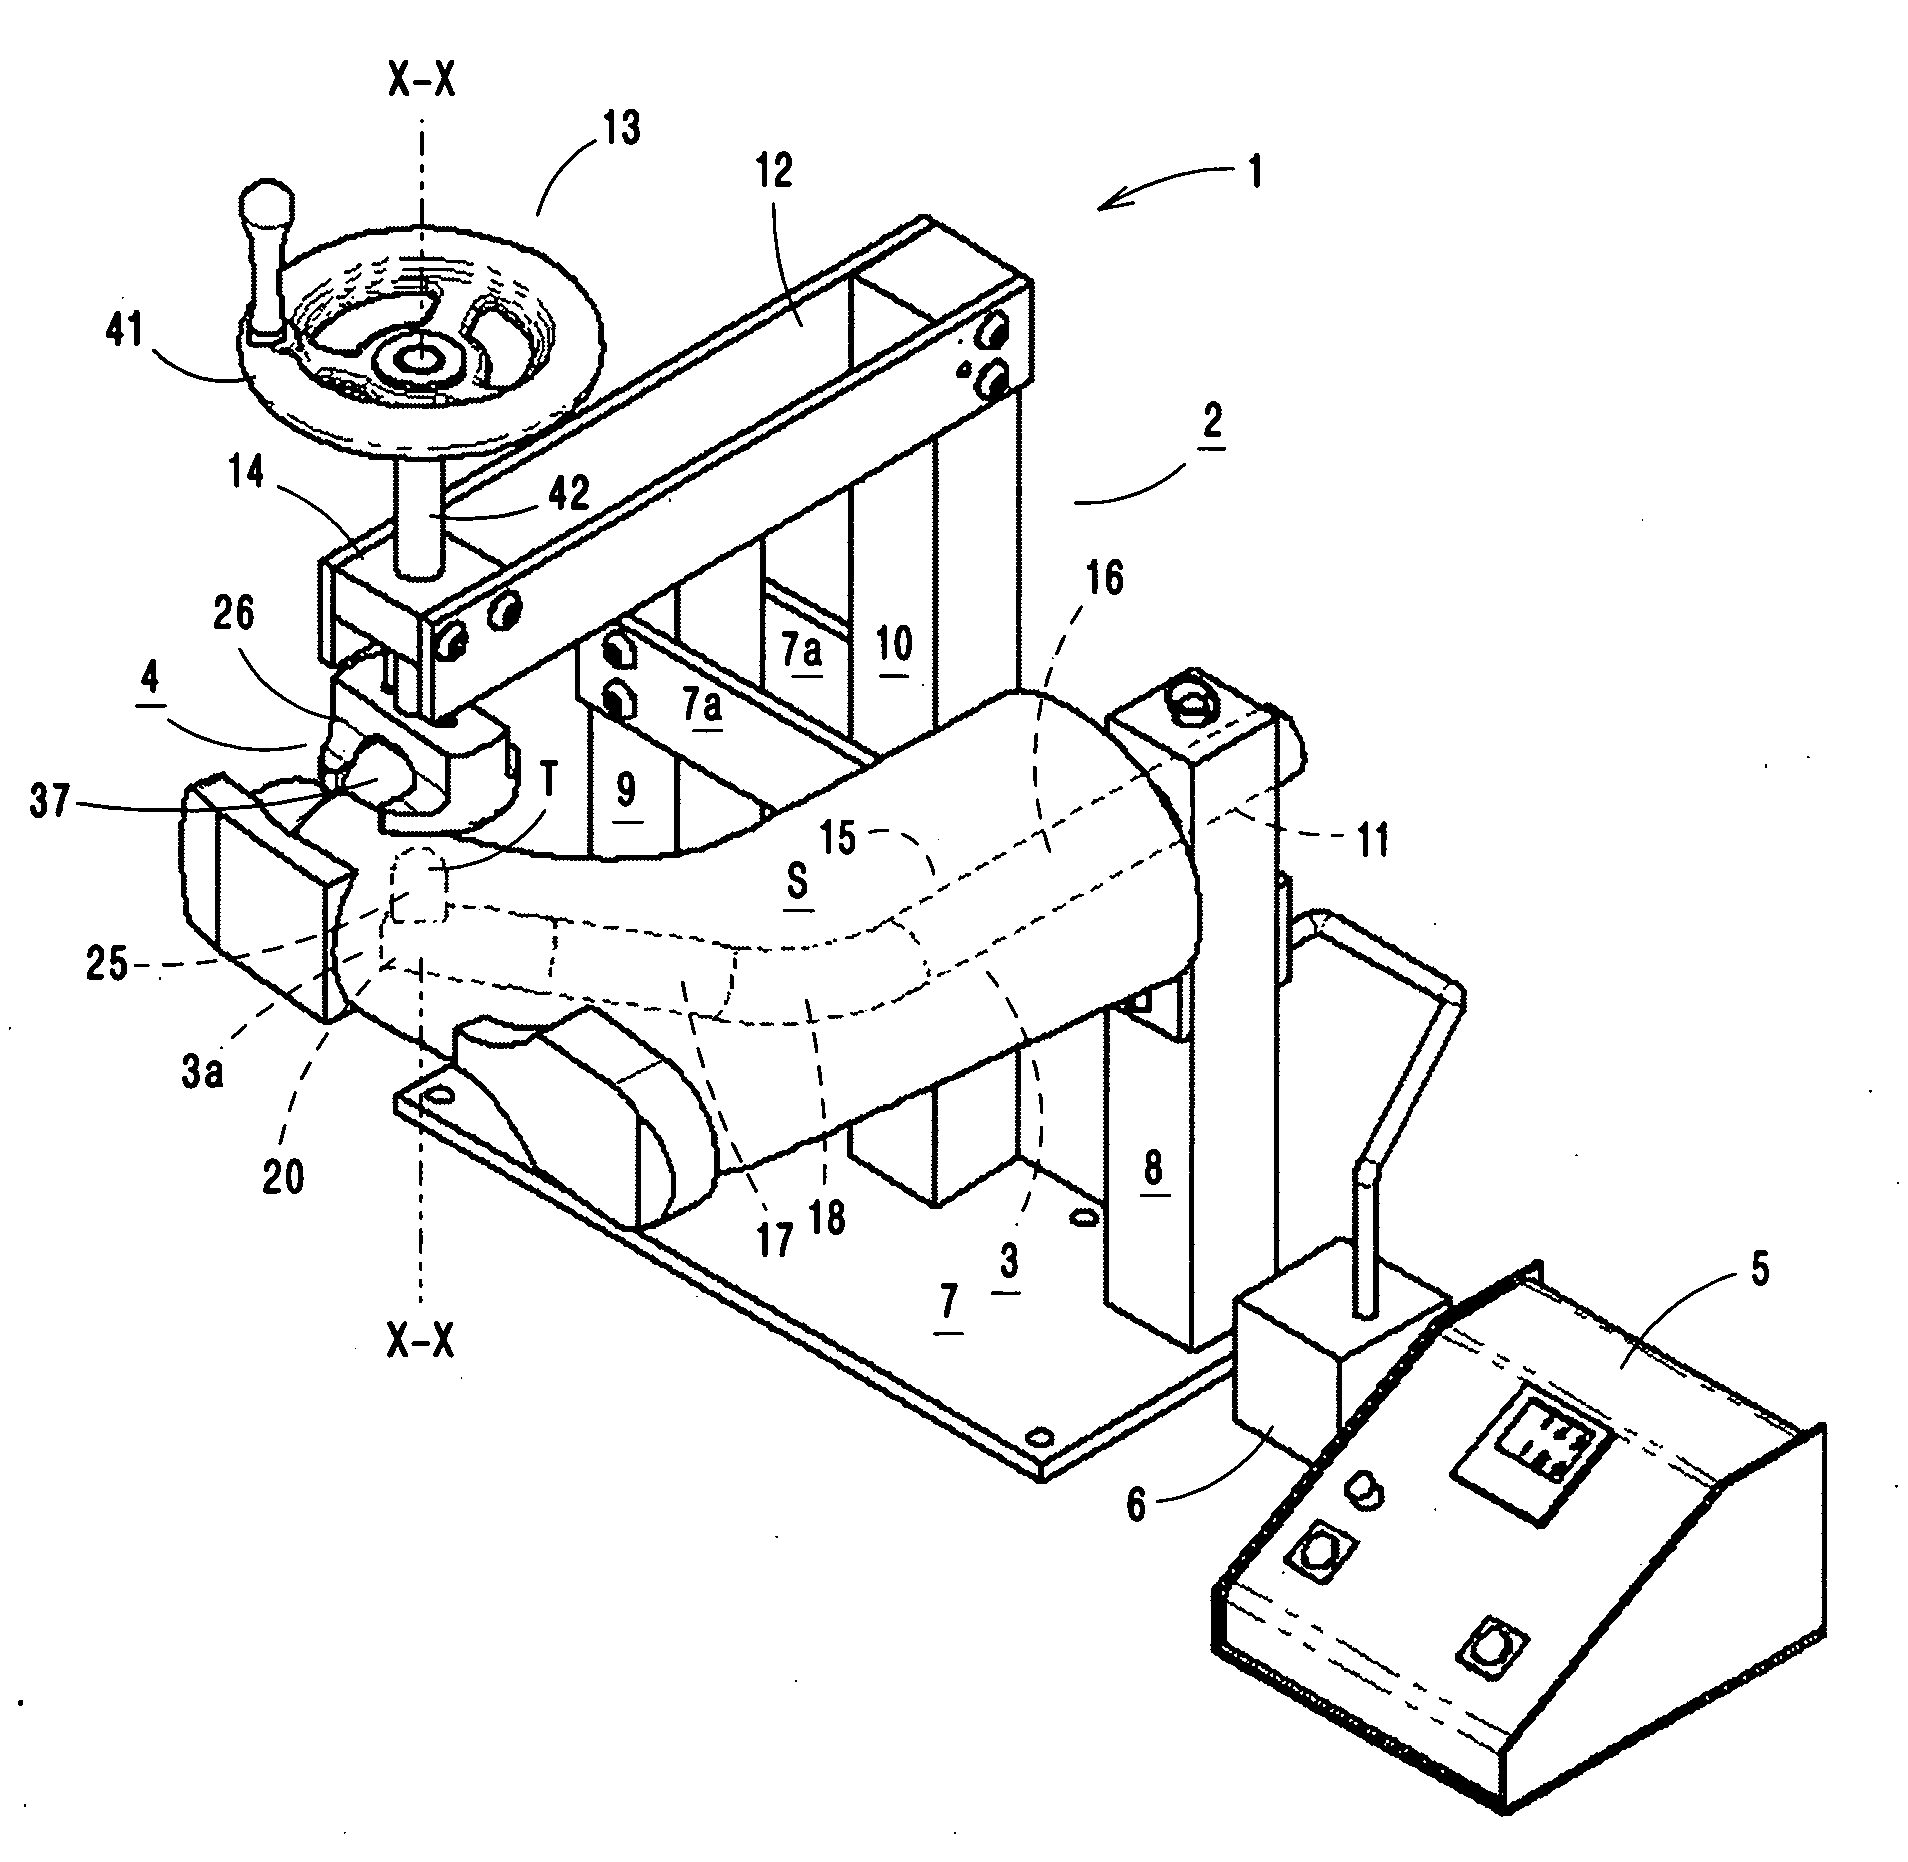 Apparatus for reshaping footwear and the method thereof